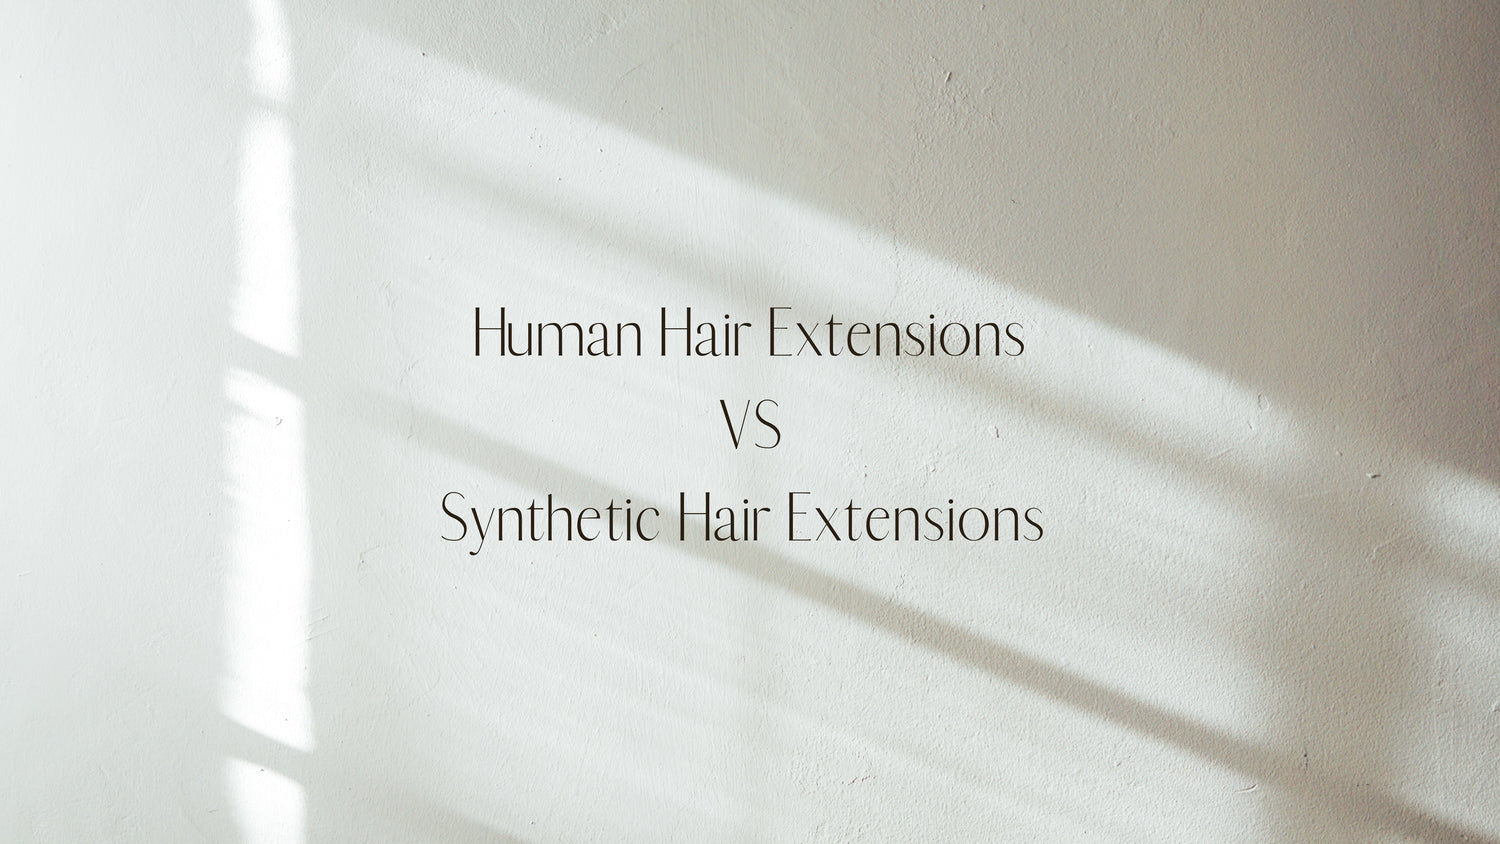 SYNTHETIC HAIR EXTENSIONS VS HUMAN HAIR EXTENSIONS